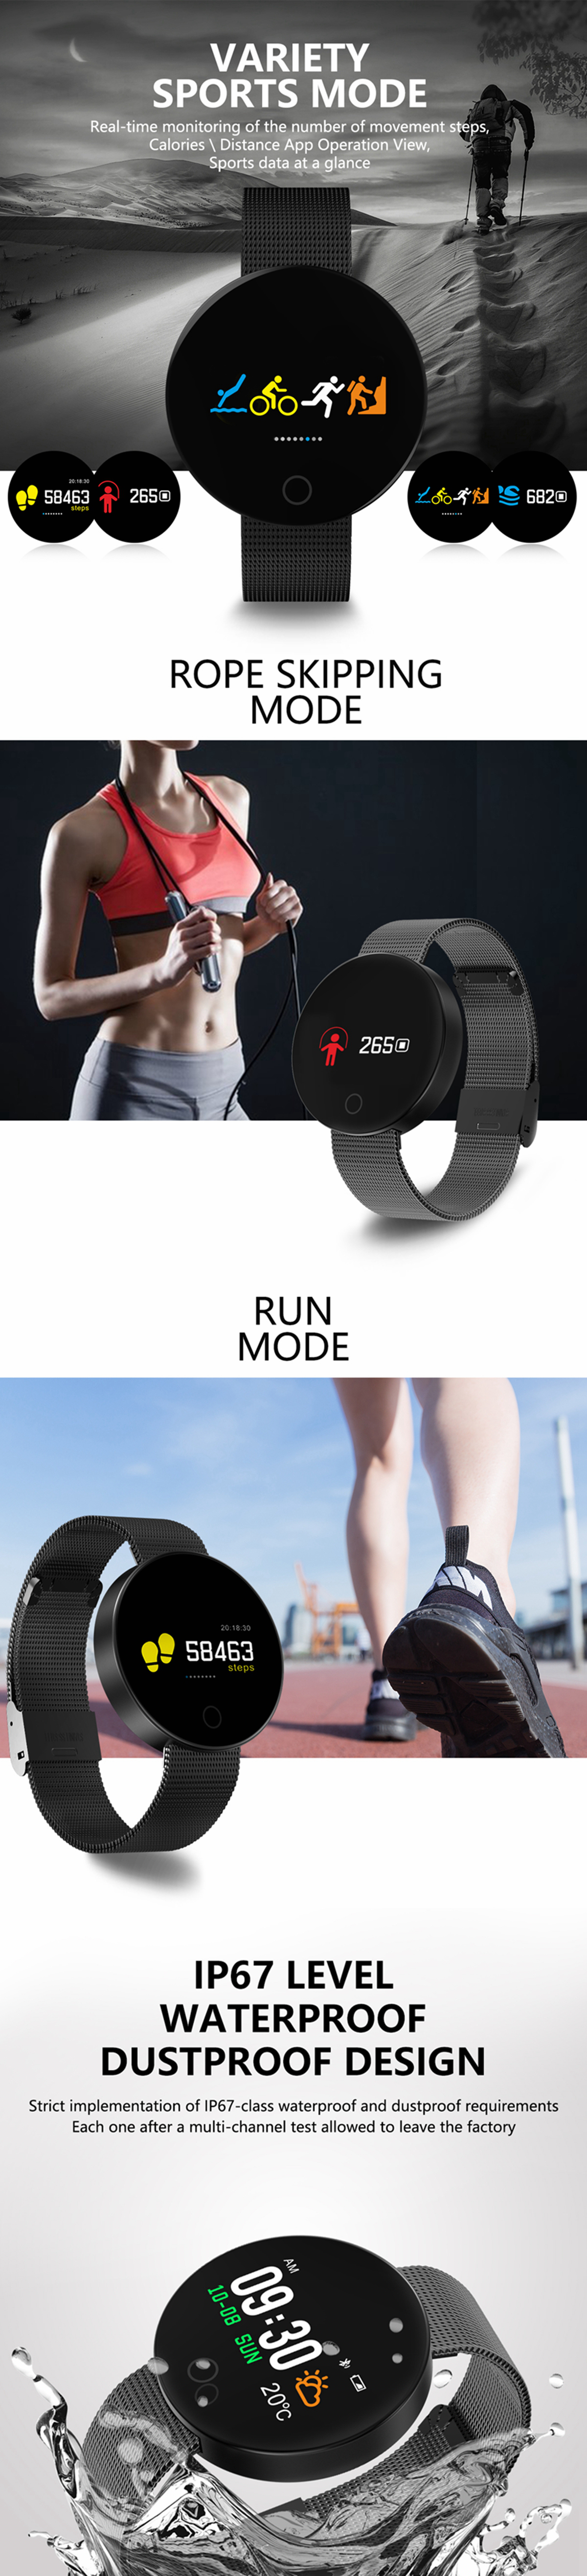 Bakeey-007Pro-096inch-Blood-Pressure-Heart-Rate-Monitor-Multi-mode-Sport-Bluetooth-Smart-Writstband-1234160